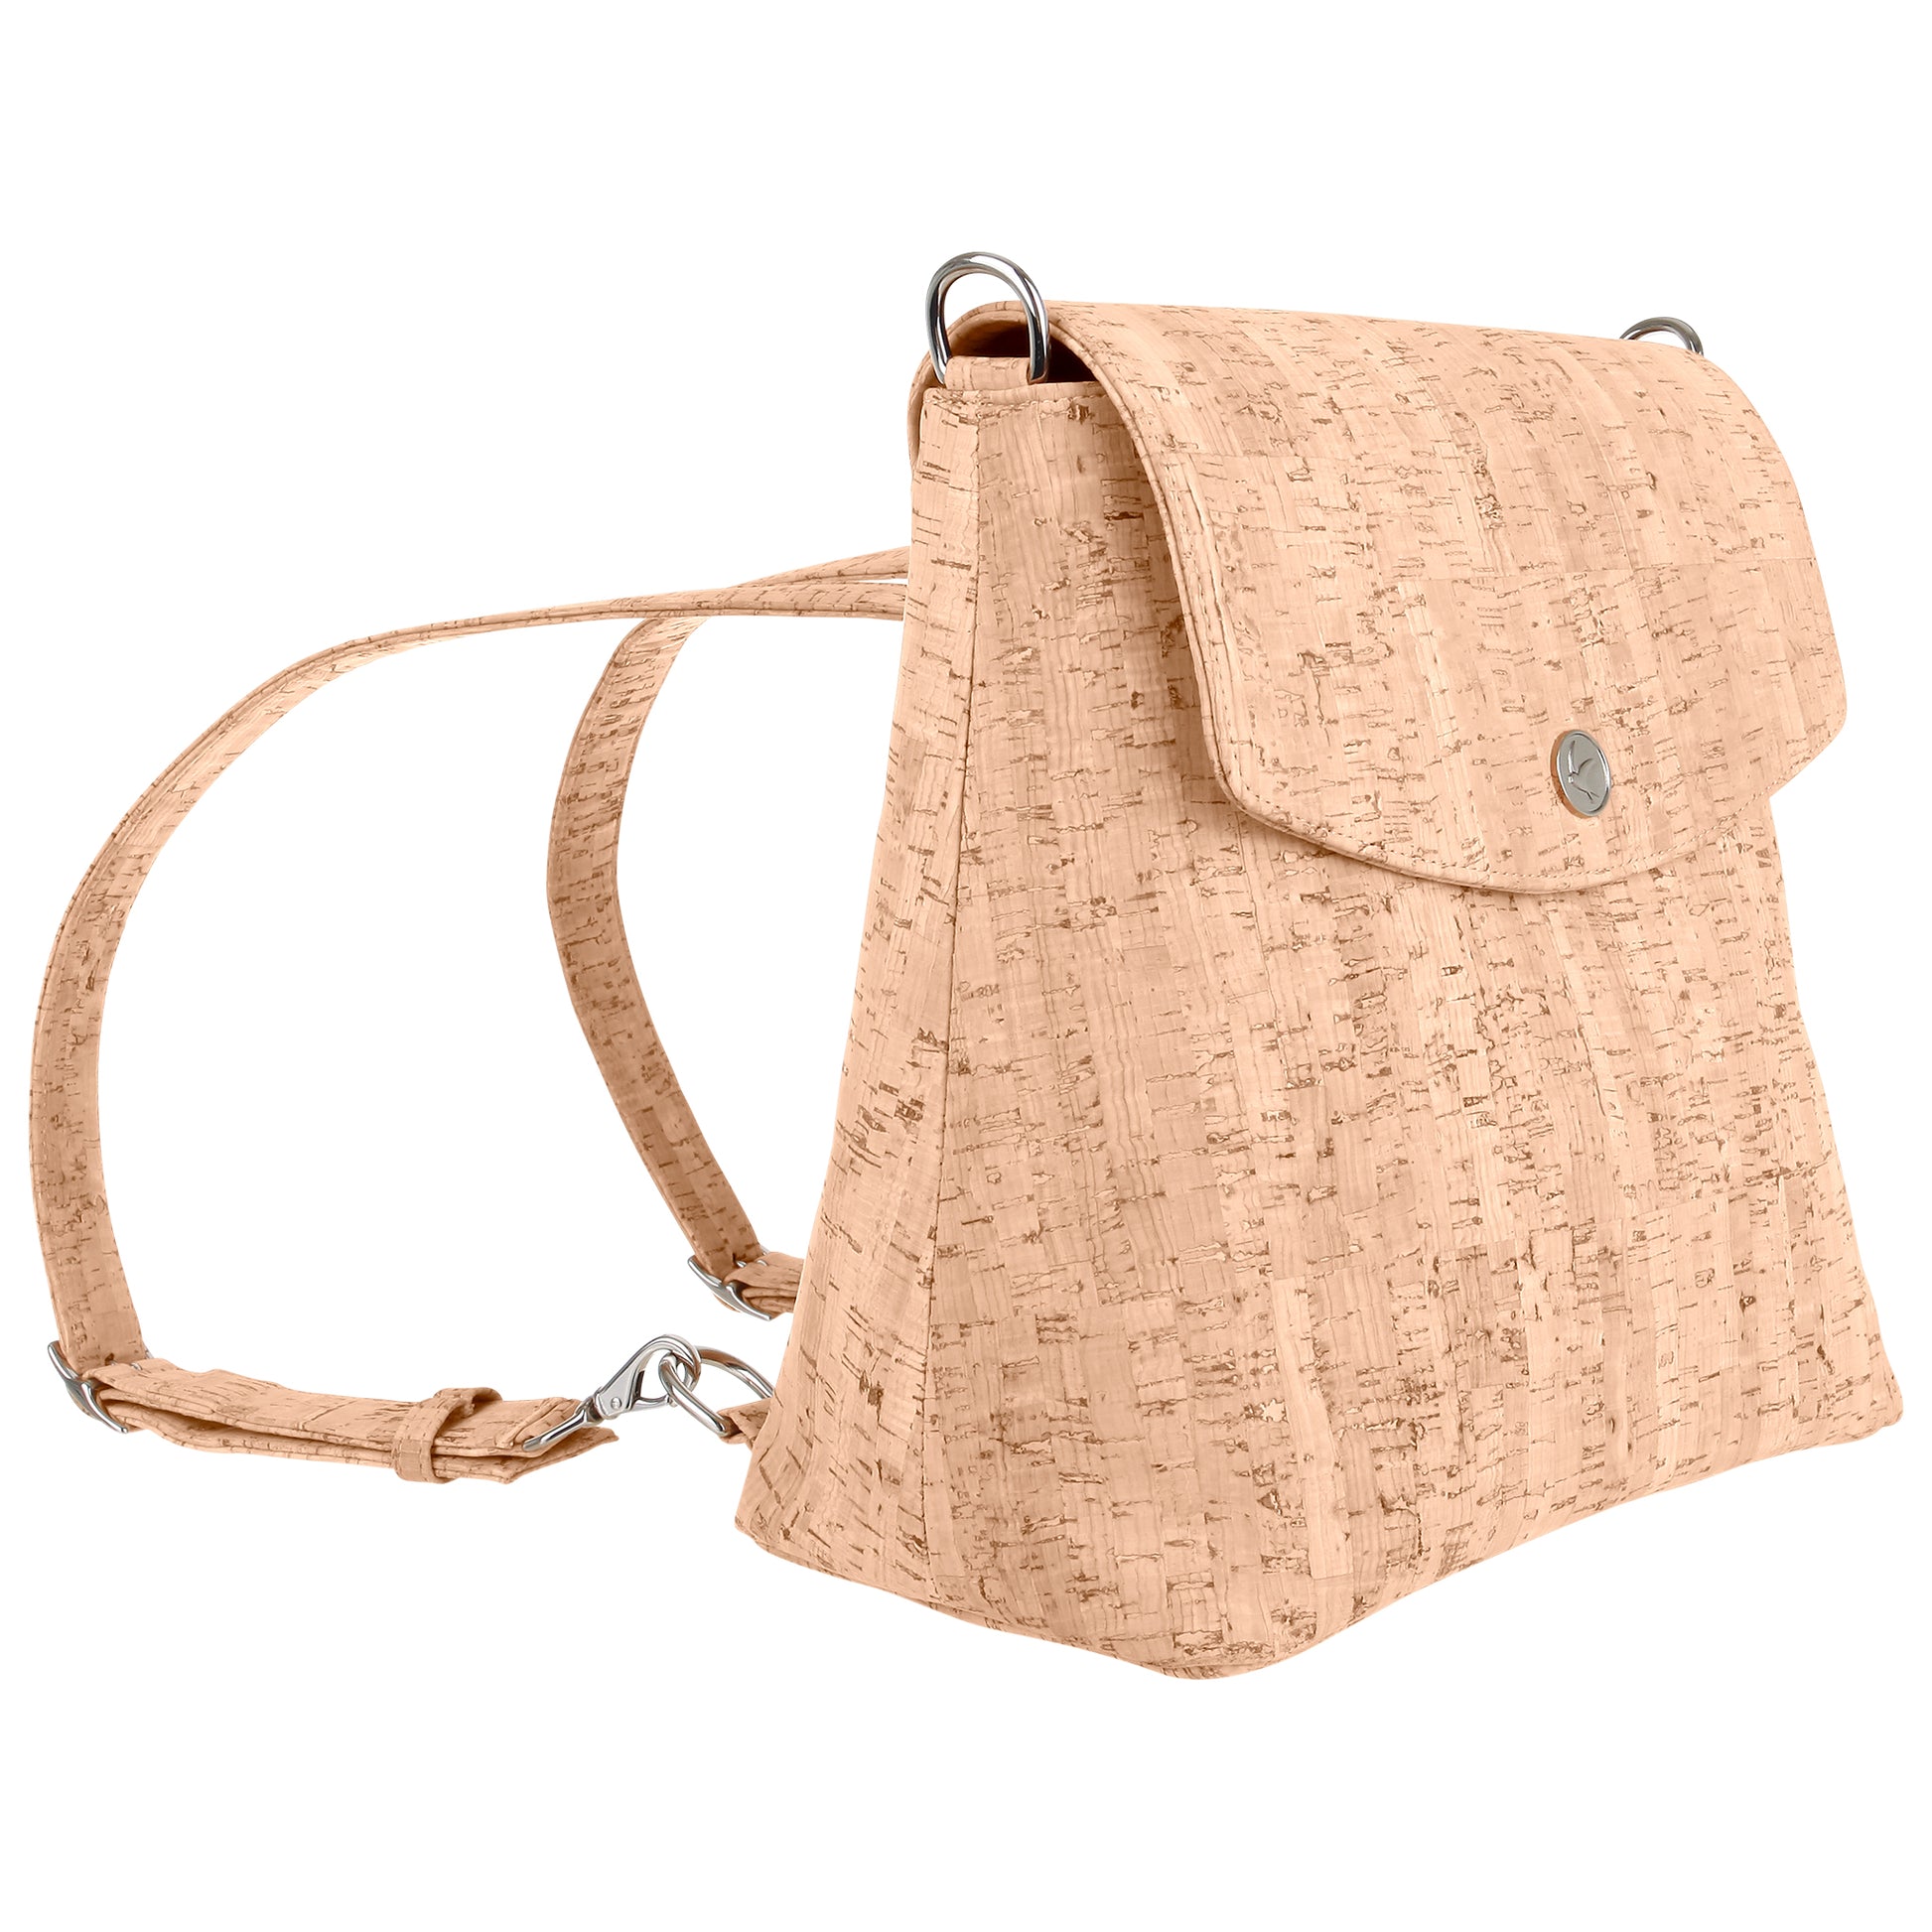 natural cork vegan backpack with straps new arrivals, made in